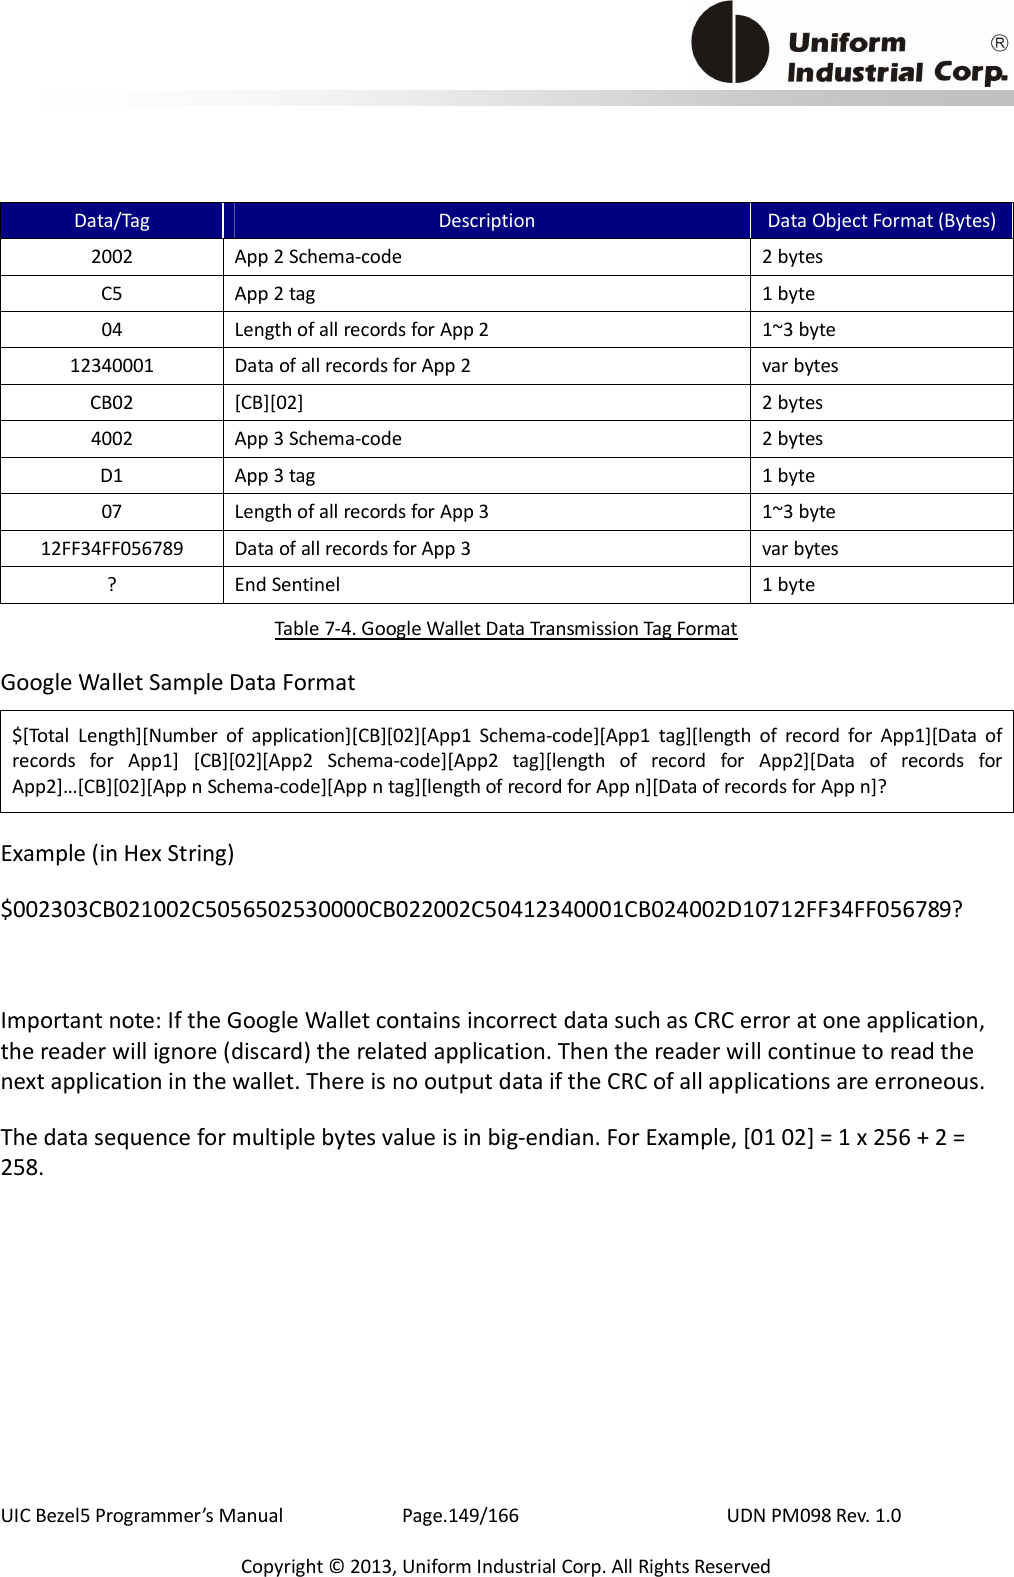                                           UIC Bezel5 Programmer’s Manual      Page.149/166                    UDN PM098 Rev. 1.0 Copyright © 2013, Uniform Industrial Corp. All Rights Reserved Data/Tag  Description  Data Object Format (Bytes) 2002  App 2 Schema-code  2 bytes C5  App 2 tag  1 byte 04  Length of all records for App 2  1~3 byte 12340001  Data of all records for App 2  var bytes CB02  [CB][02]  2 bytes 4002  App 3 Schema-code  2 bytes D1  App 3 tag  1 byte 07  Length of all records for App 3  1~3 byte 12FF34FF056789  Data of all records for App 3  var bytes ?  End Sentinel  1 byte Table 7-4. Google Wallet Data Transmission Tag Format Google Wallet Sample Data Format $[Total  Length][Number  of  application][CB][02][App1  Schema-code][App1  tag][length  of  record  for  App1][Data  of records  for  App1]  [CB][02][App2  Schema-code][App2  tag][length  of  record  for  App2][Data  of  records  for App2]…[CB][02][App n Schema-code][App n tag][length of record for App n][Data of records for App n]? Example (in Hex String) $002303CB021002C5056502530000CB022002C50412340001CB024002D10712FF34FF056789?  Important note: If the Google Wallet contains incorrect data such as CRC error at one application, the reader will ignore (discard) the related application. Then the reader will continue to read the next application in the wallet. There is no output data if the CRC of all applications are erroneous. The data sequence for multiple bytes value is in big-endian. For Example, [01 02] = 1 x 256 + 2 = 258. 